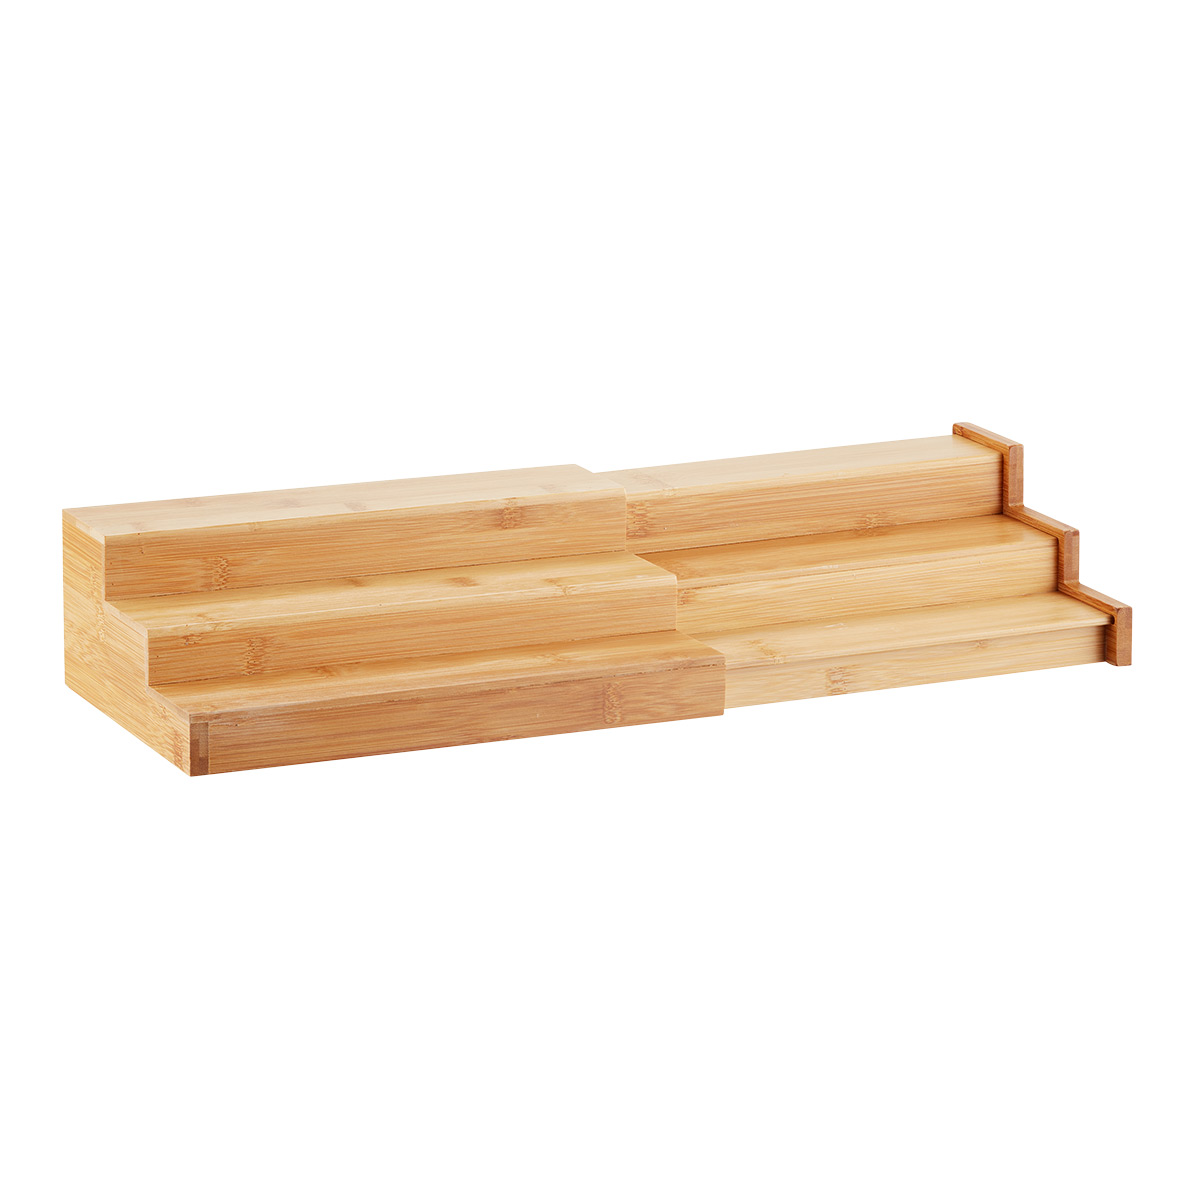 https://www.containerstore.com/catalogimages/515284/10079571-3-tier-bamboo-expanding-spi.jpg